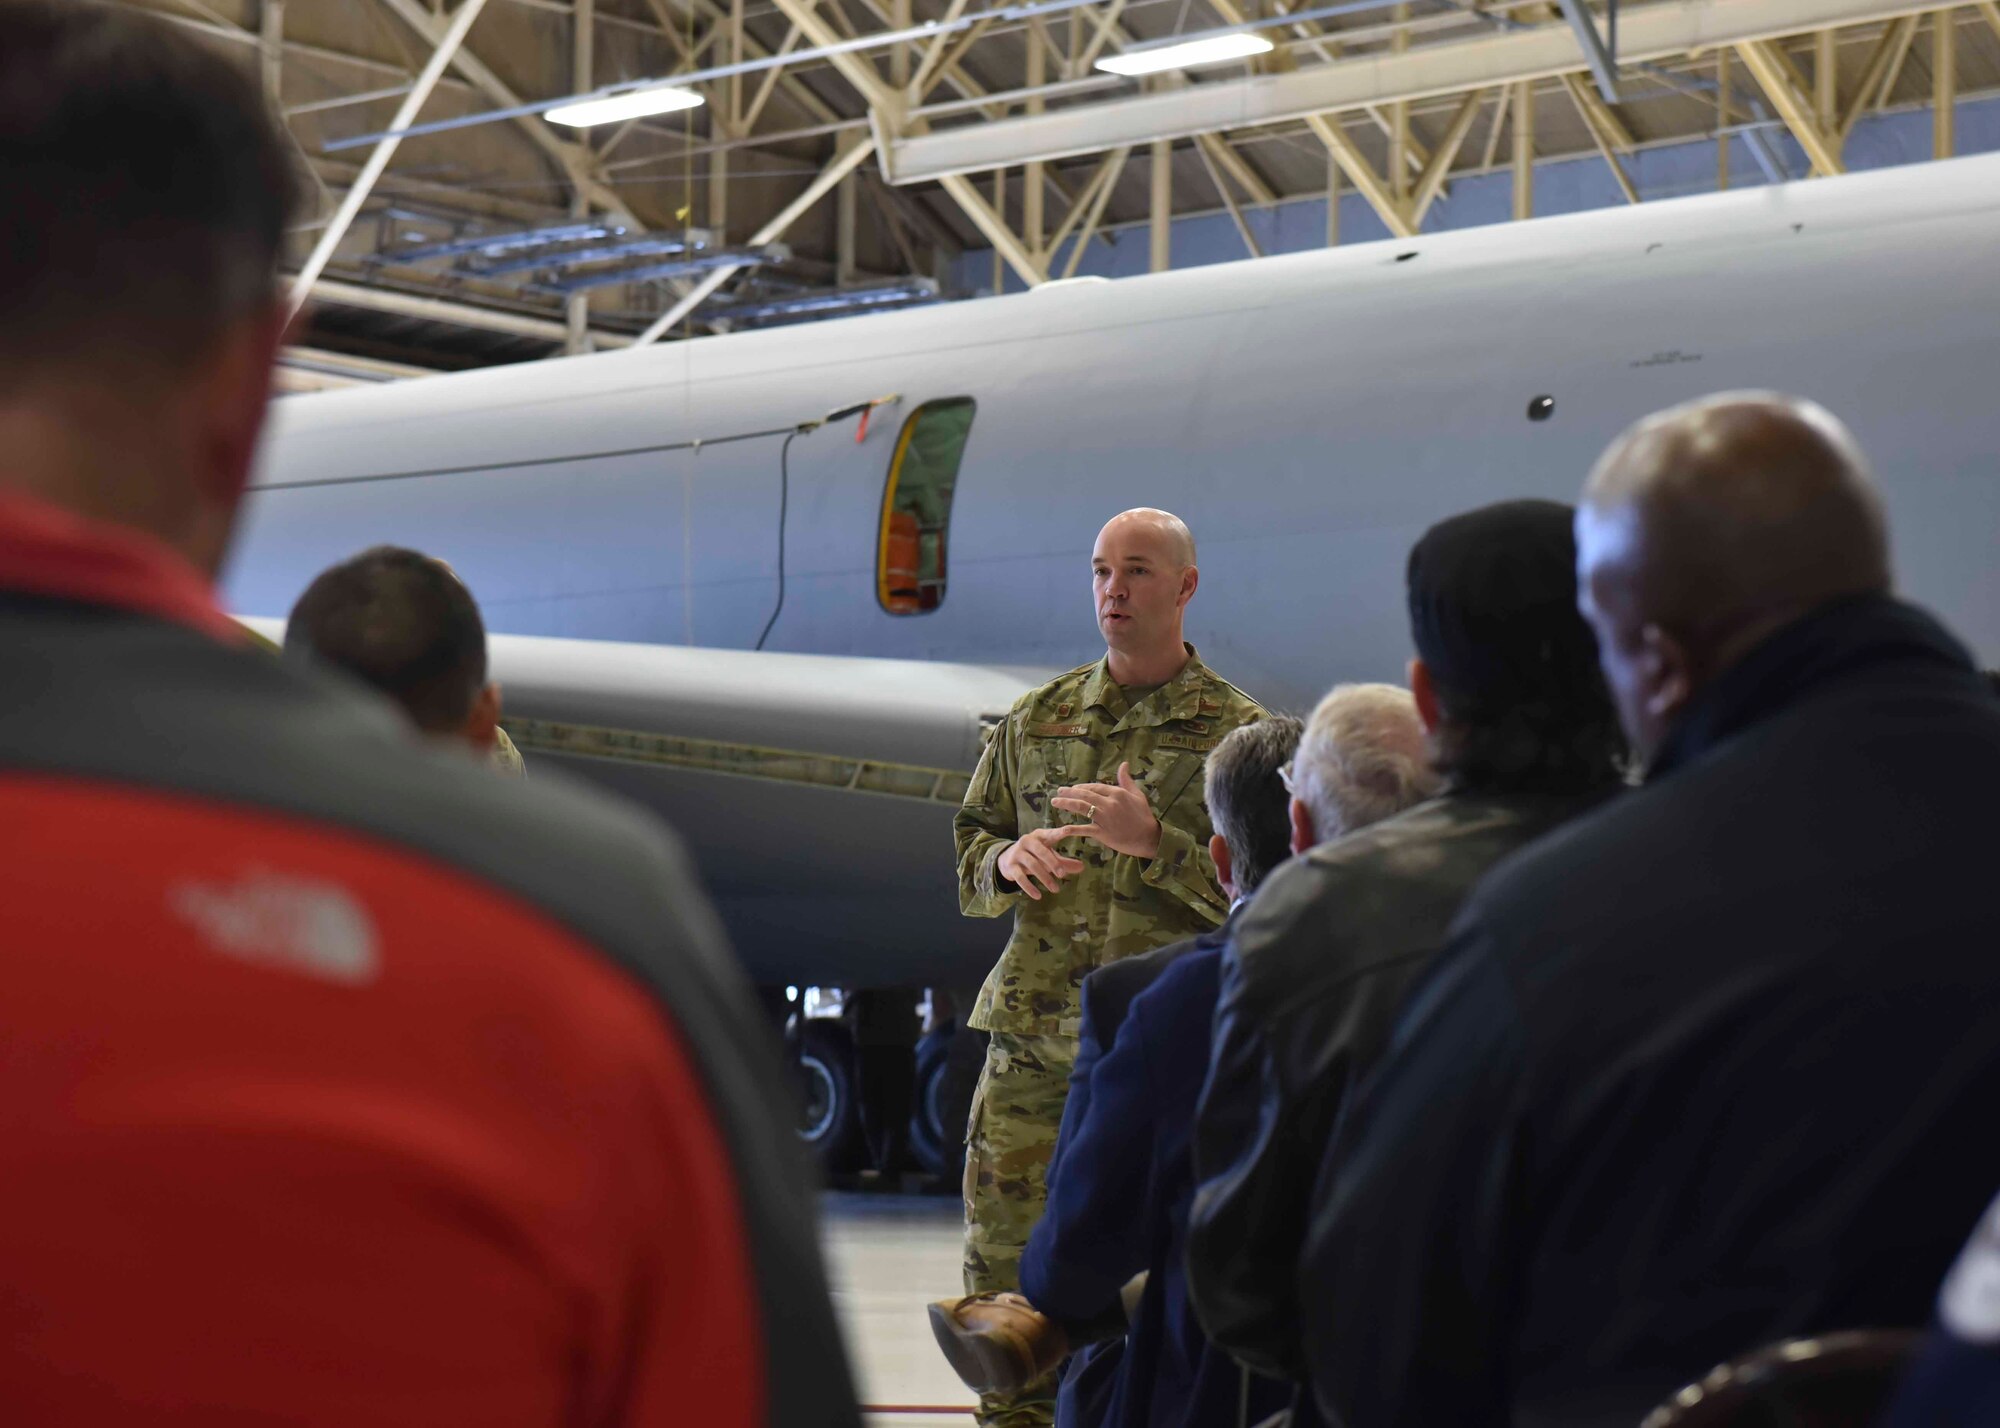 U.S. Air Force Col. Larry Gardner, 141st Air Refueling Wing commander, welcomes members from the Department of Defense Maintenance Symposium to Fairchild Air Force Base, Washington, Dec 12, 2019. Team Fairchild hosted a DoD Maintenance Symposium tour to showcase Condition Base Maintenance Plus, Theory of Constraints and innovations implemented. (U.S. Air Force photo by Airman 1st Class Kiaundra Miller)